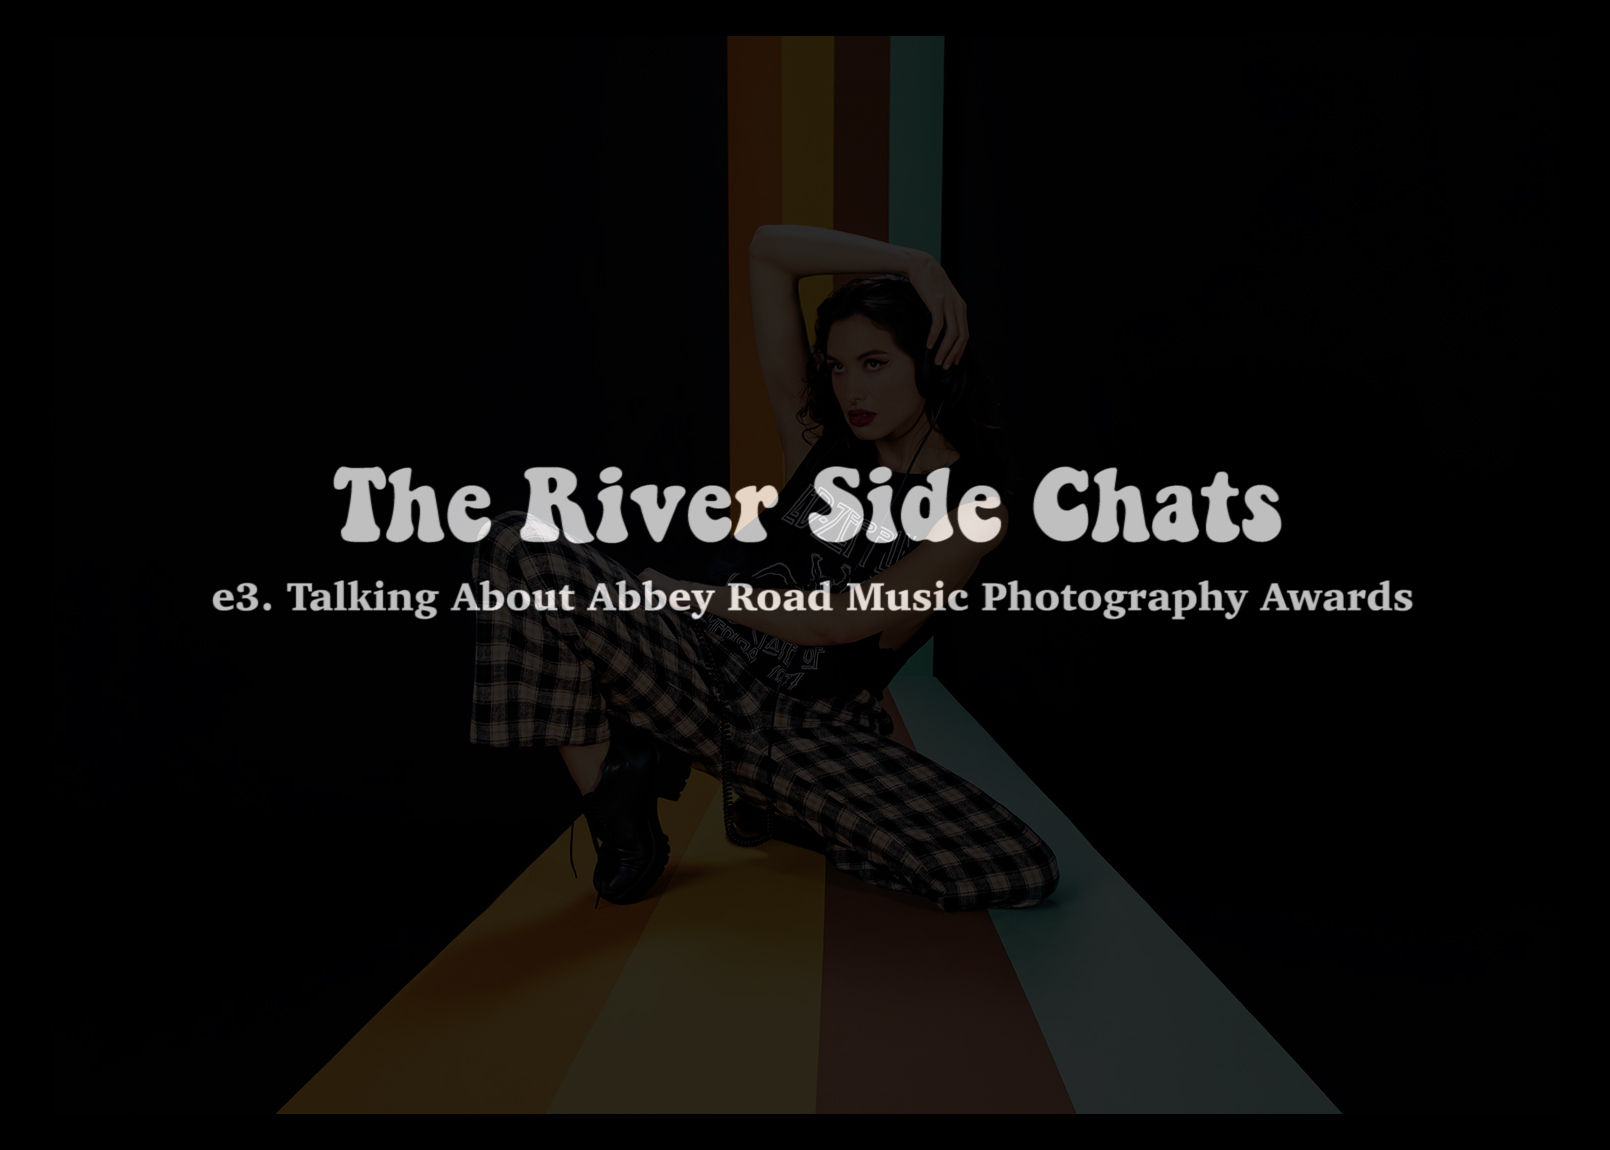  The River Side Chats - E3  Talking About Abbey Road Studios MPA 2022 - Jada and David Parrish